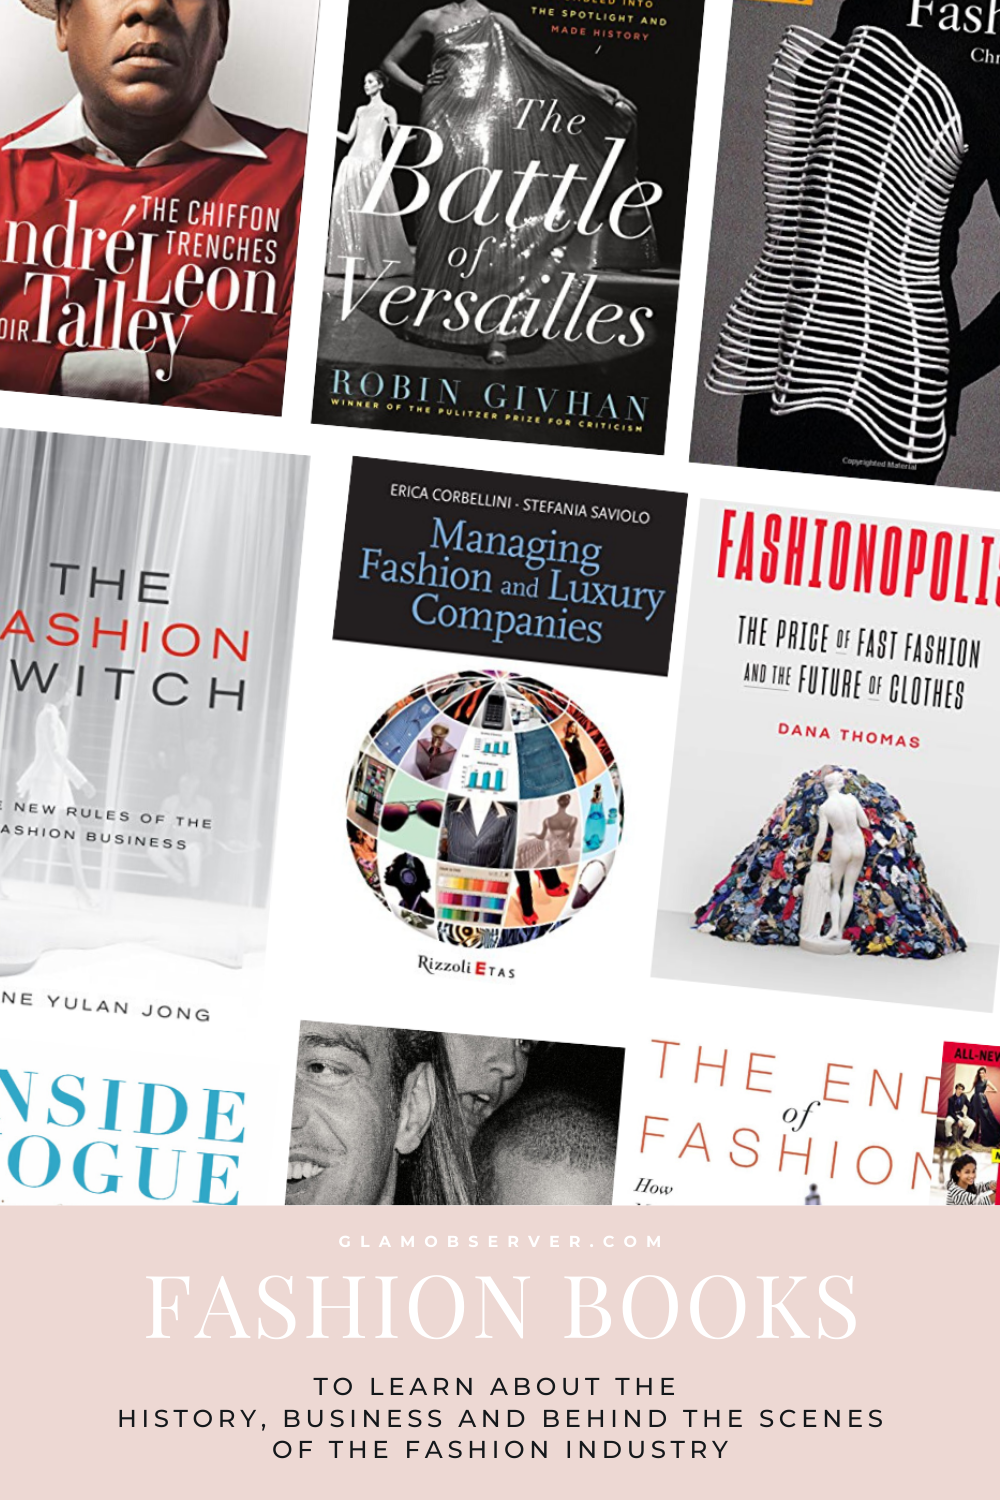 Fashion Books to learn about the history, business and behind the